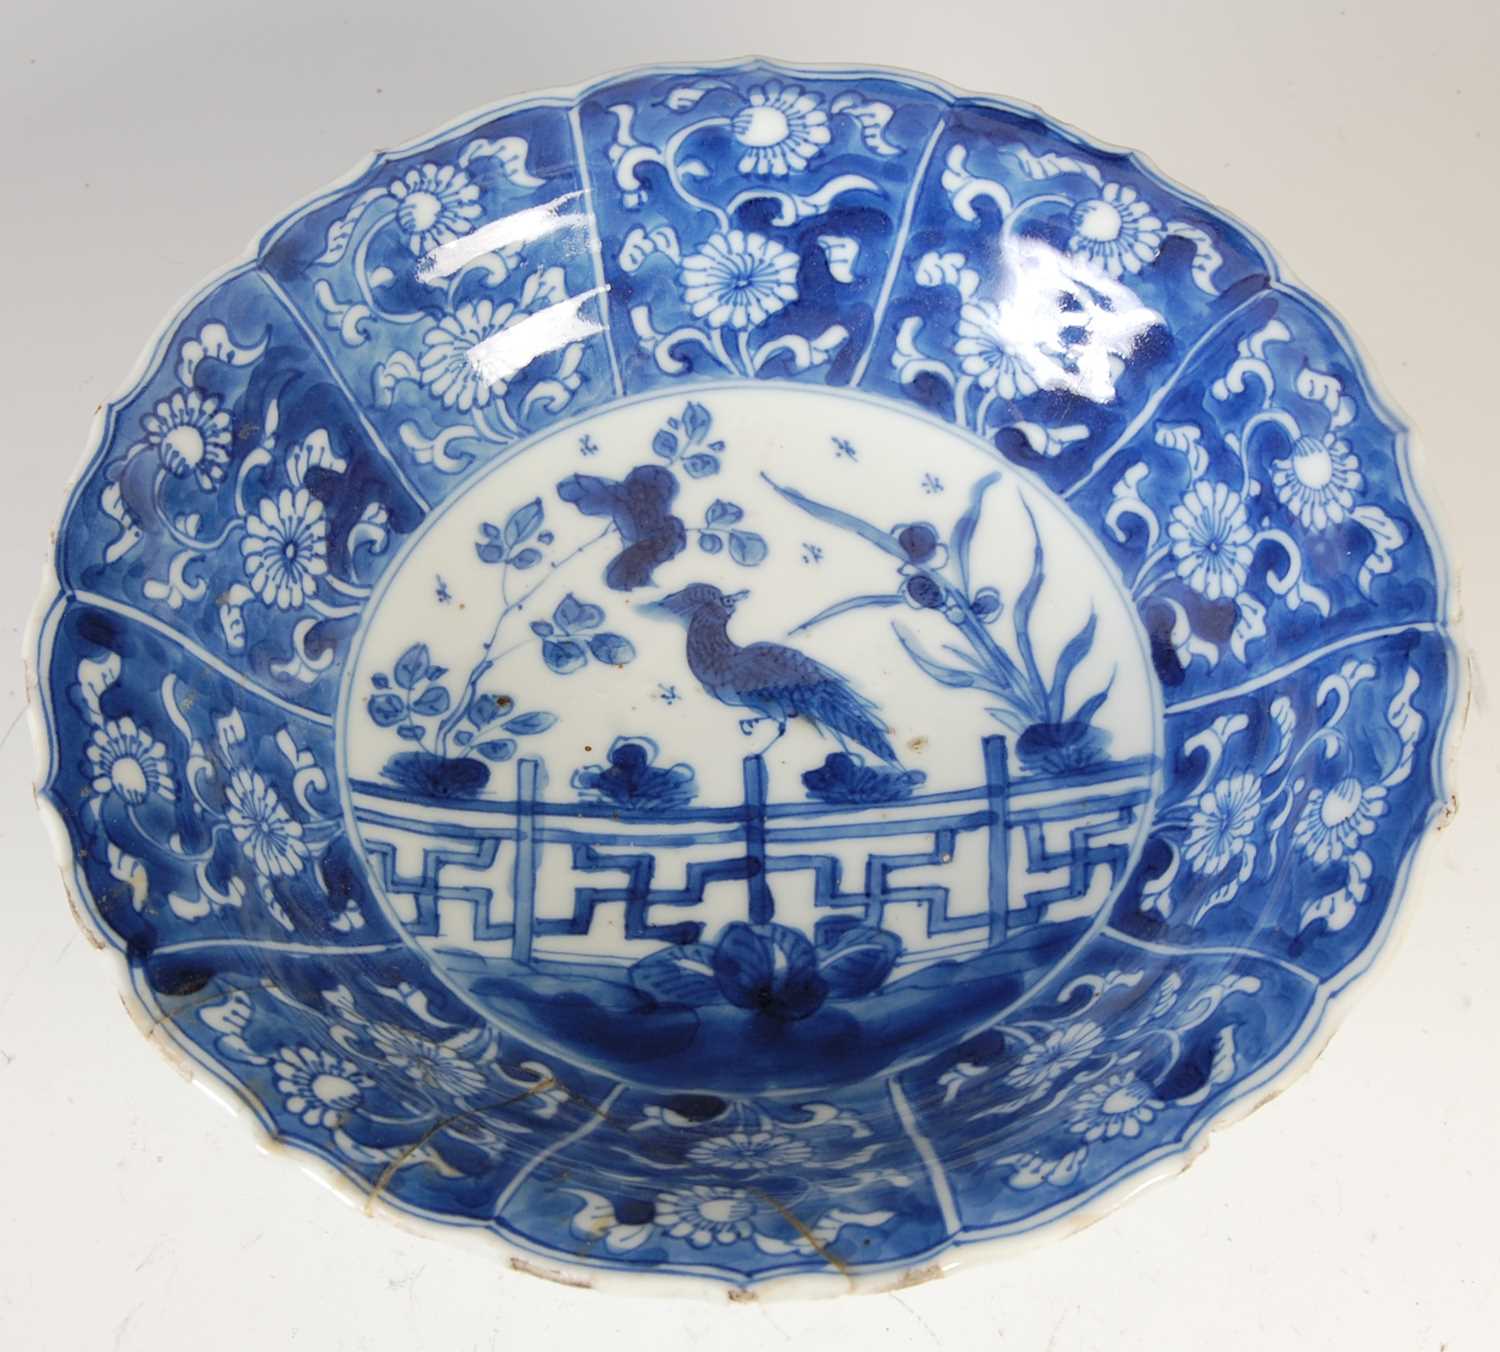 A Chinese porcelain blue and white tazza, Qing Dynasty, decorated with central roundel of bird - Image 9 of 11